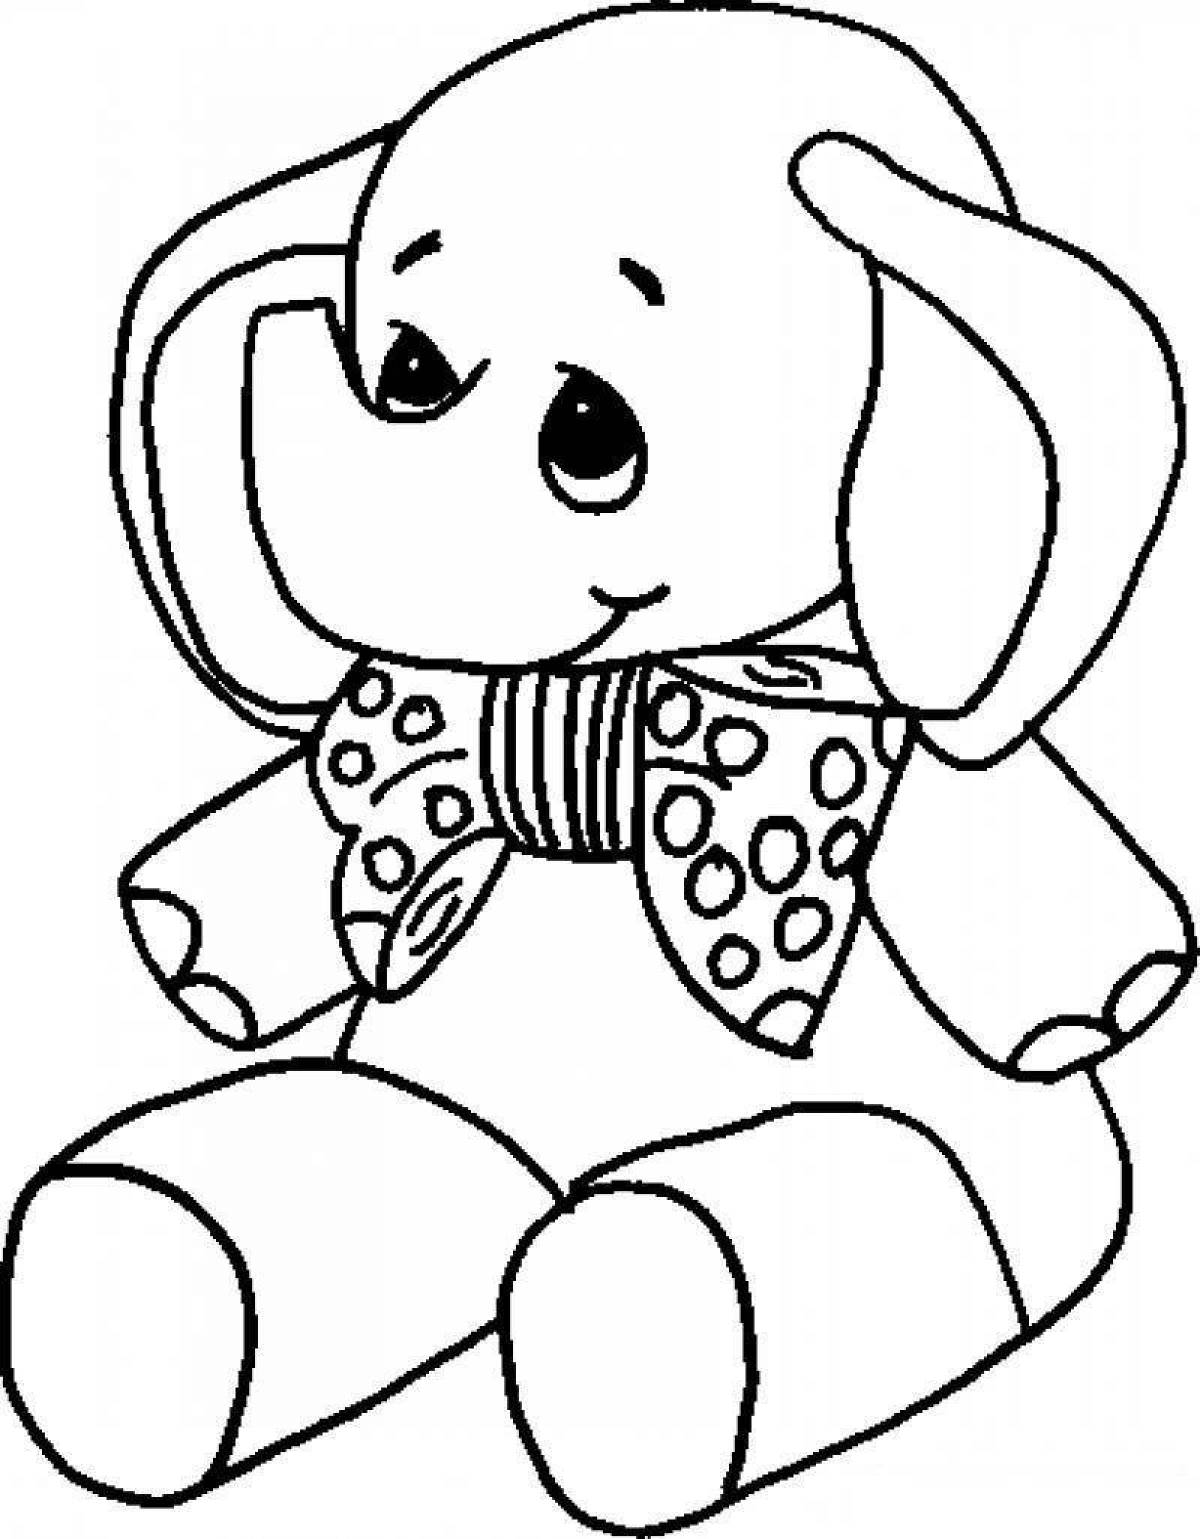 Awesome toy coloring page